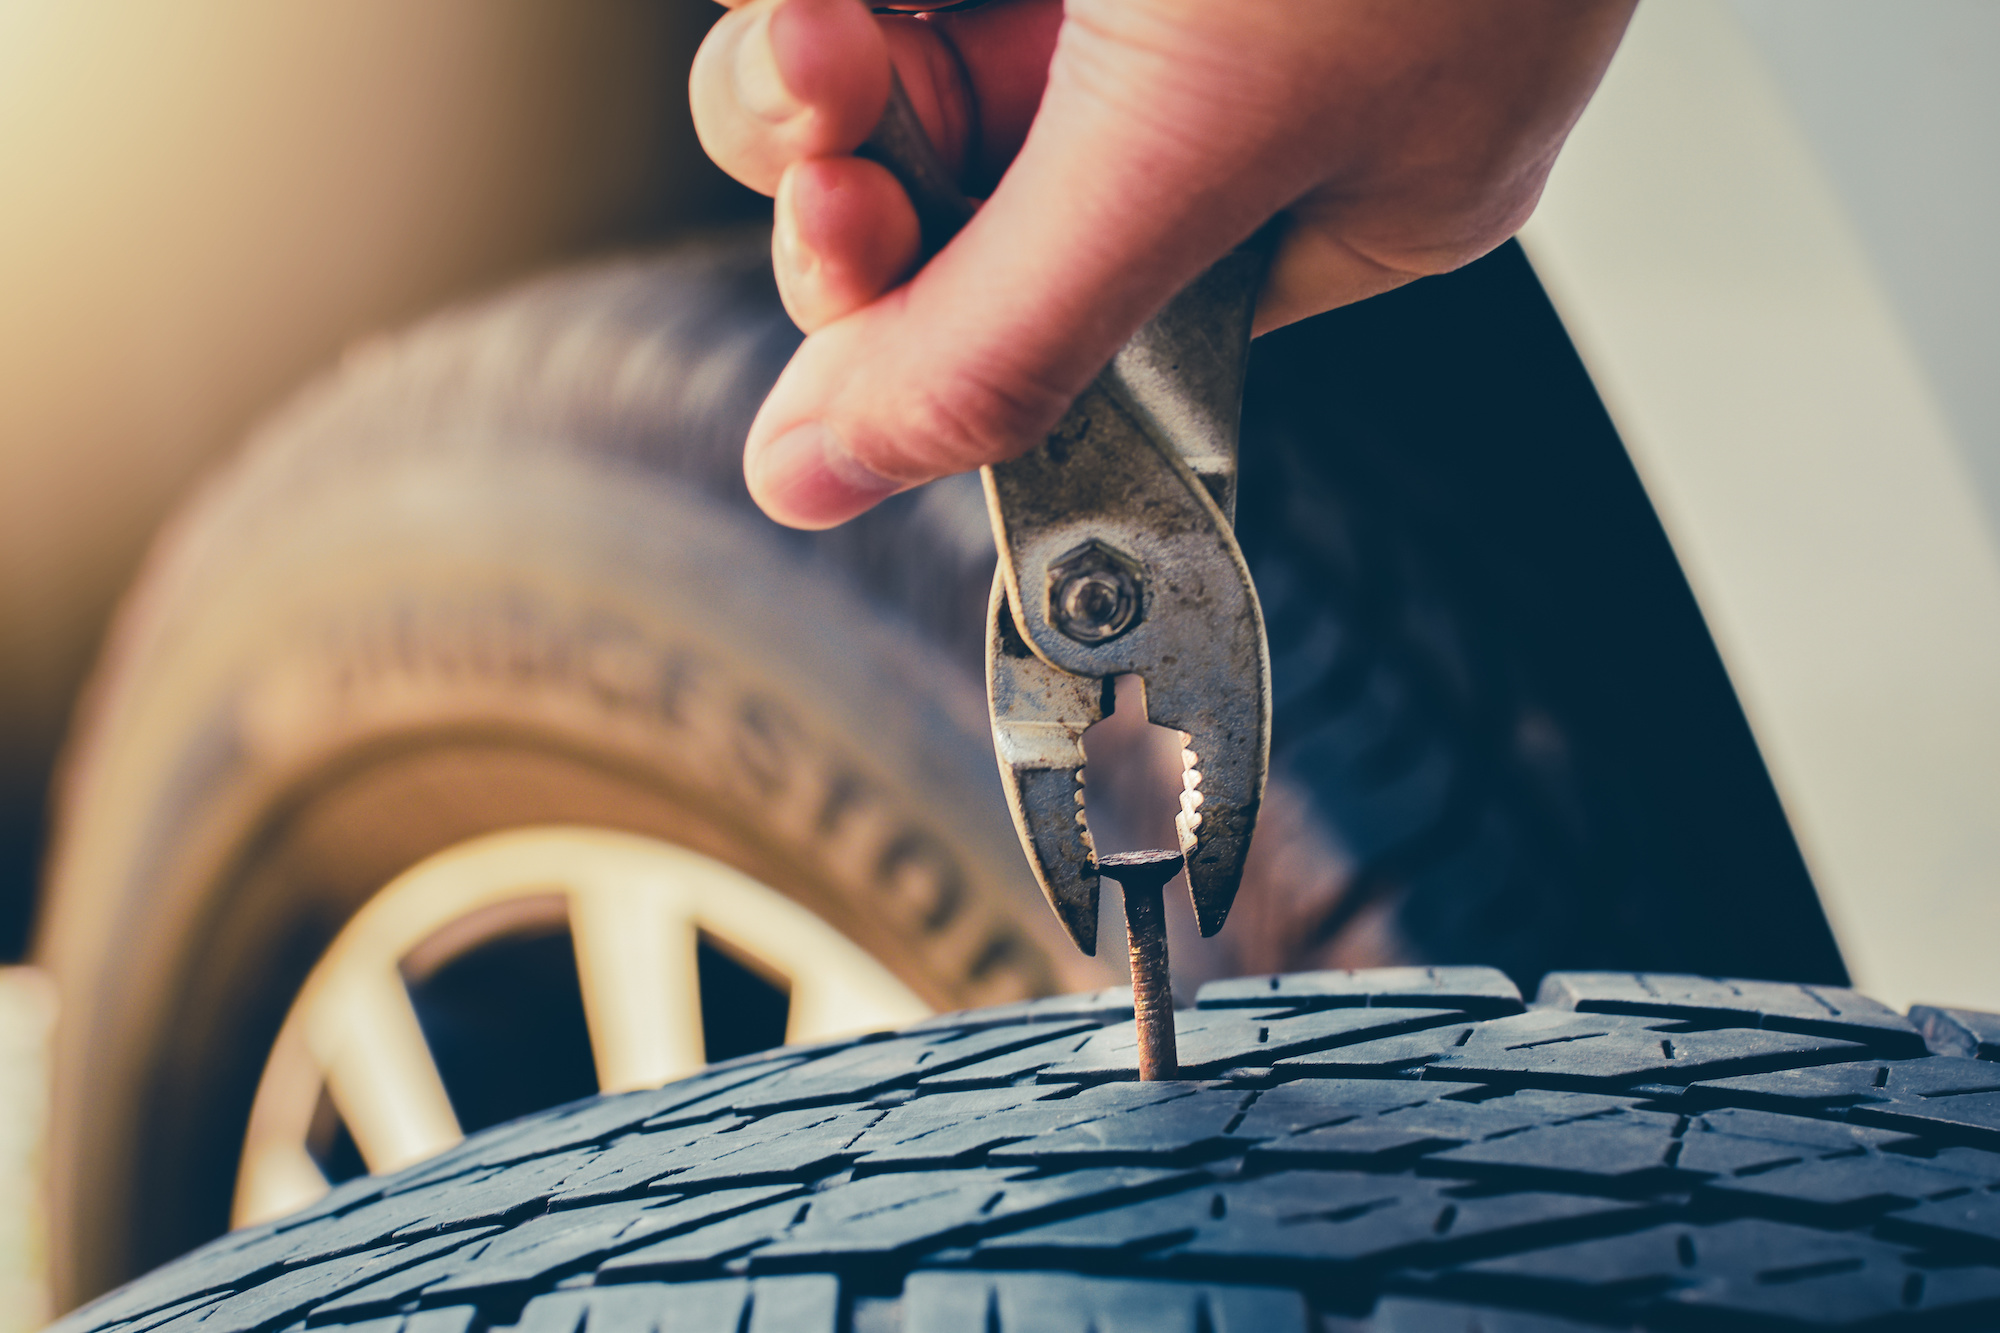 Nail In Tire Leased Car, Nail In Tire Leased Car: 6 Steps To Prevent Lease Penalties for Tire Damage, KevweAuto